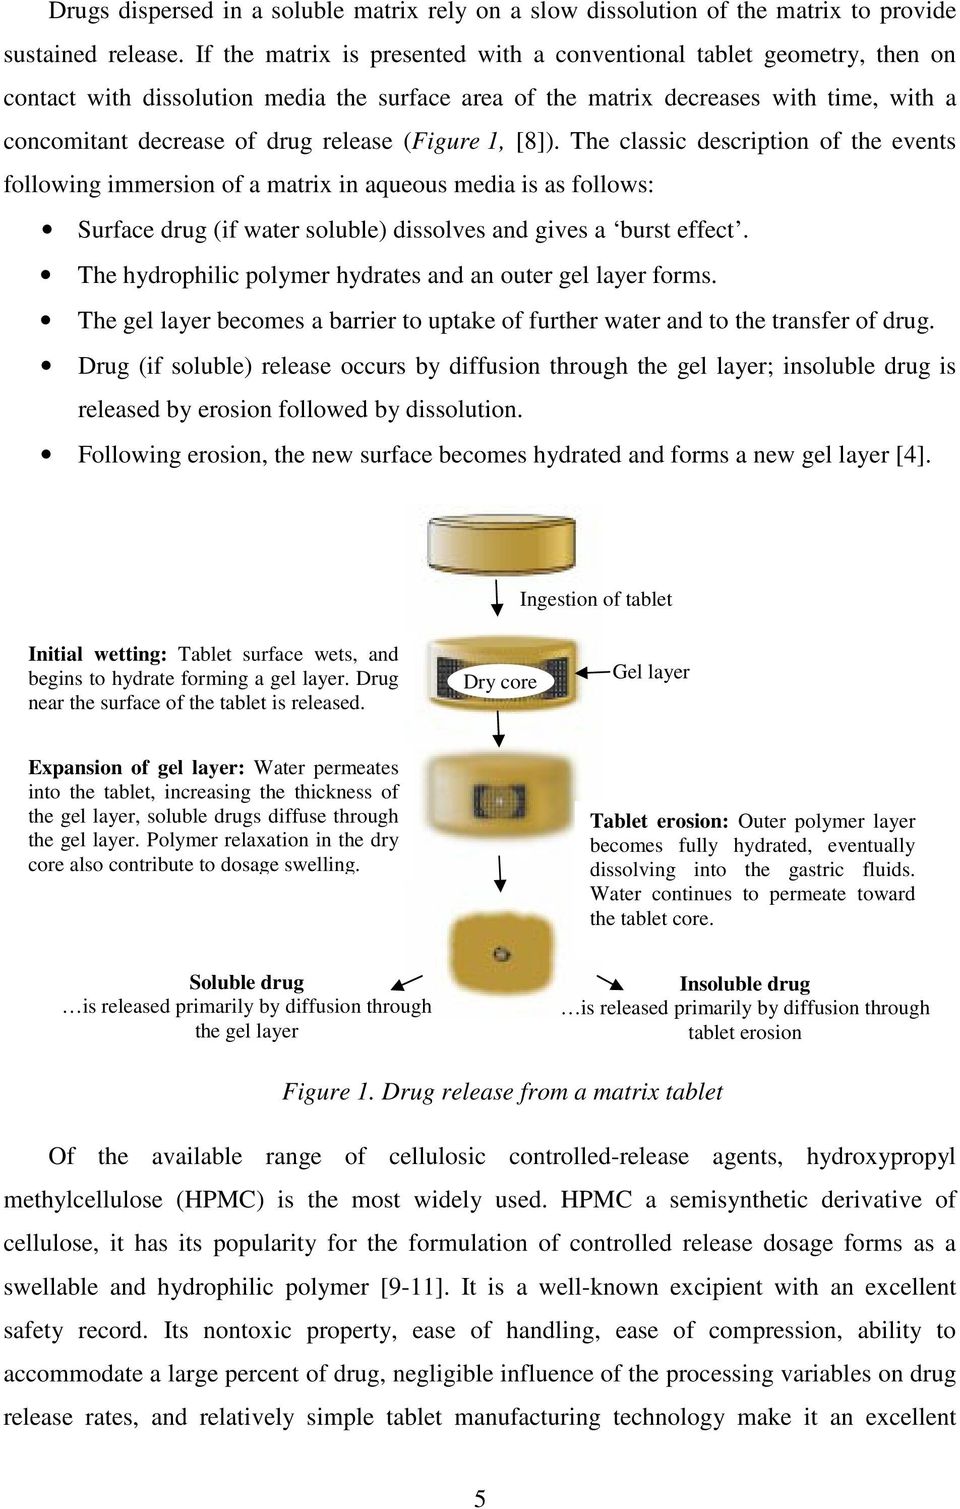 (Figure 1, [8]). The classic description of the events following immersion of a matrix in aqueous media is as follows: Surface drug (if water soluble) dissolves and gives a burst effect.